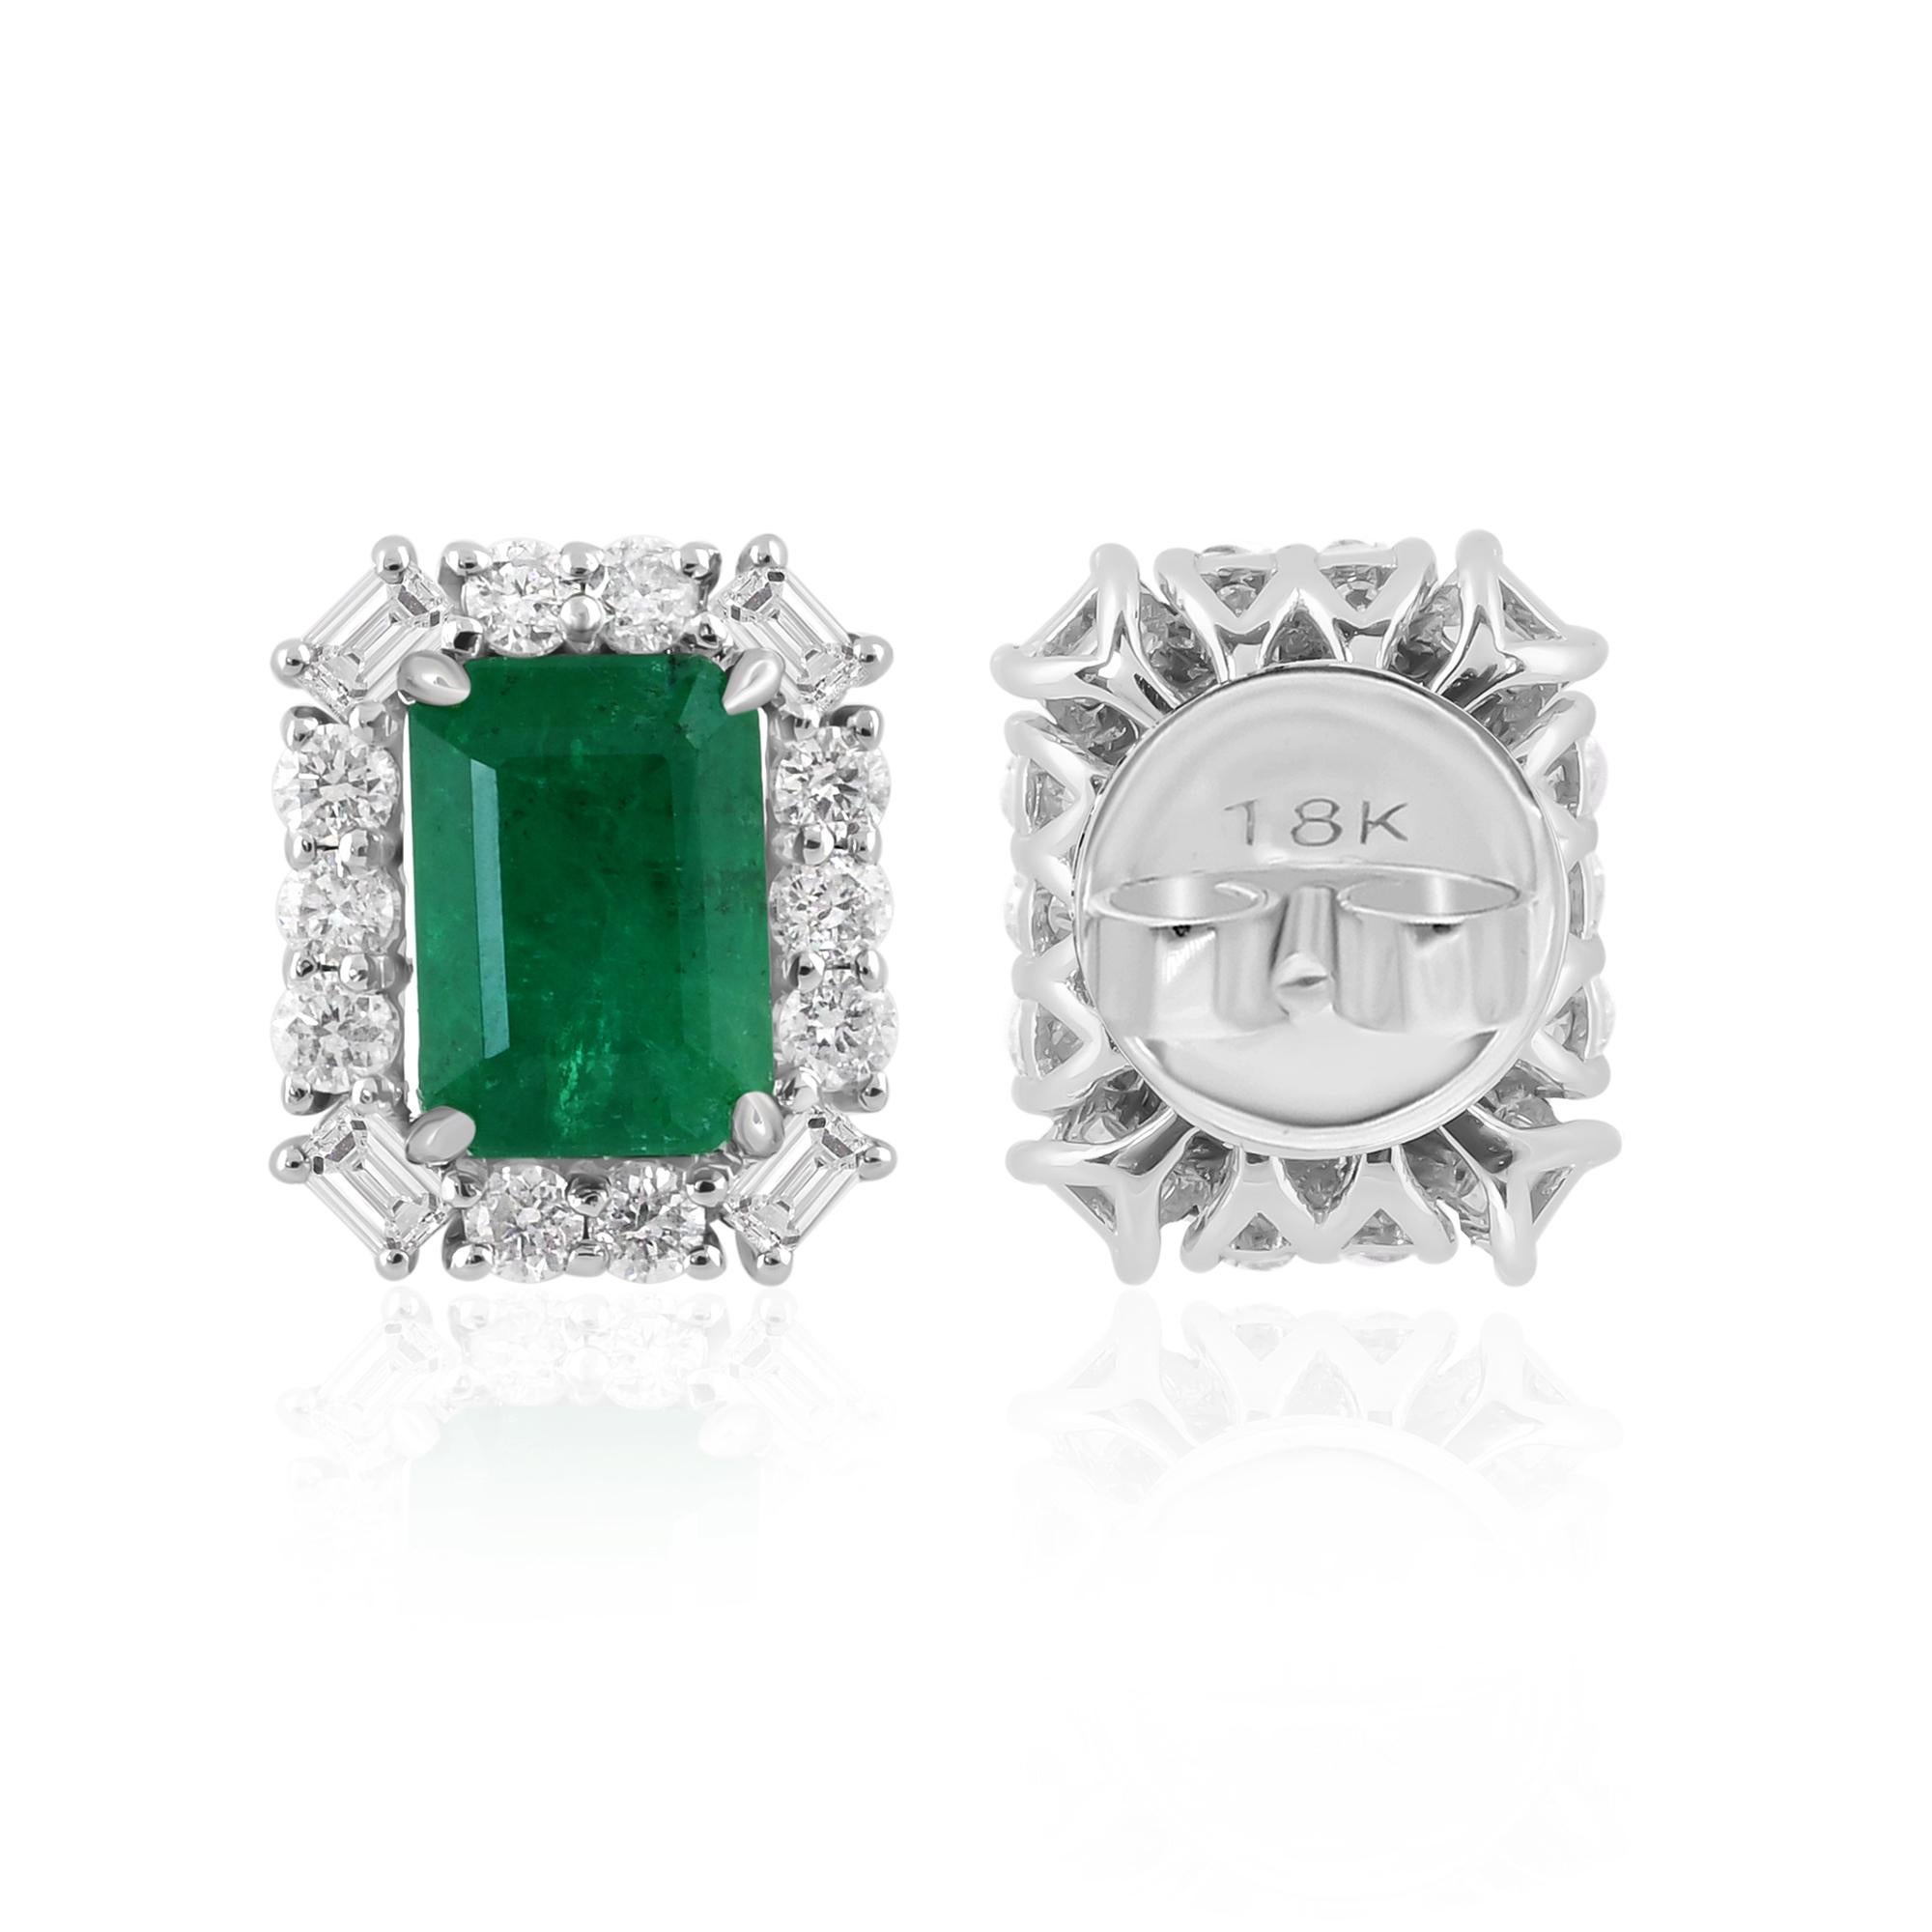 Step into a world of enchantment with these Zambian Emerald Gemstone Earrings, a masterpiece of handmade jewelry crafted in elegant 18 Karat White Gold. Radiating sophistication and allure, these earrings feature exquisite Zambian emeralds accented